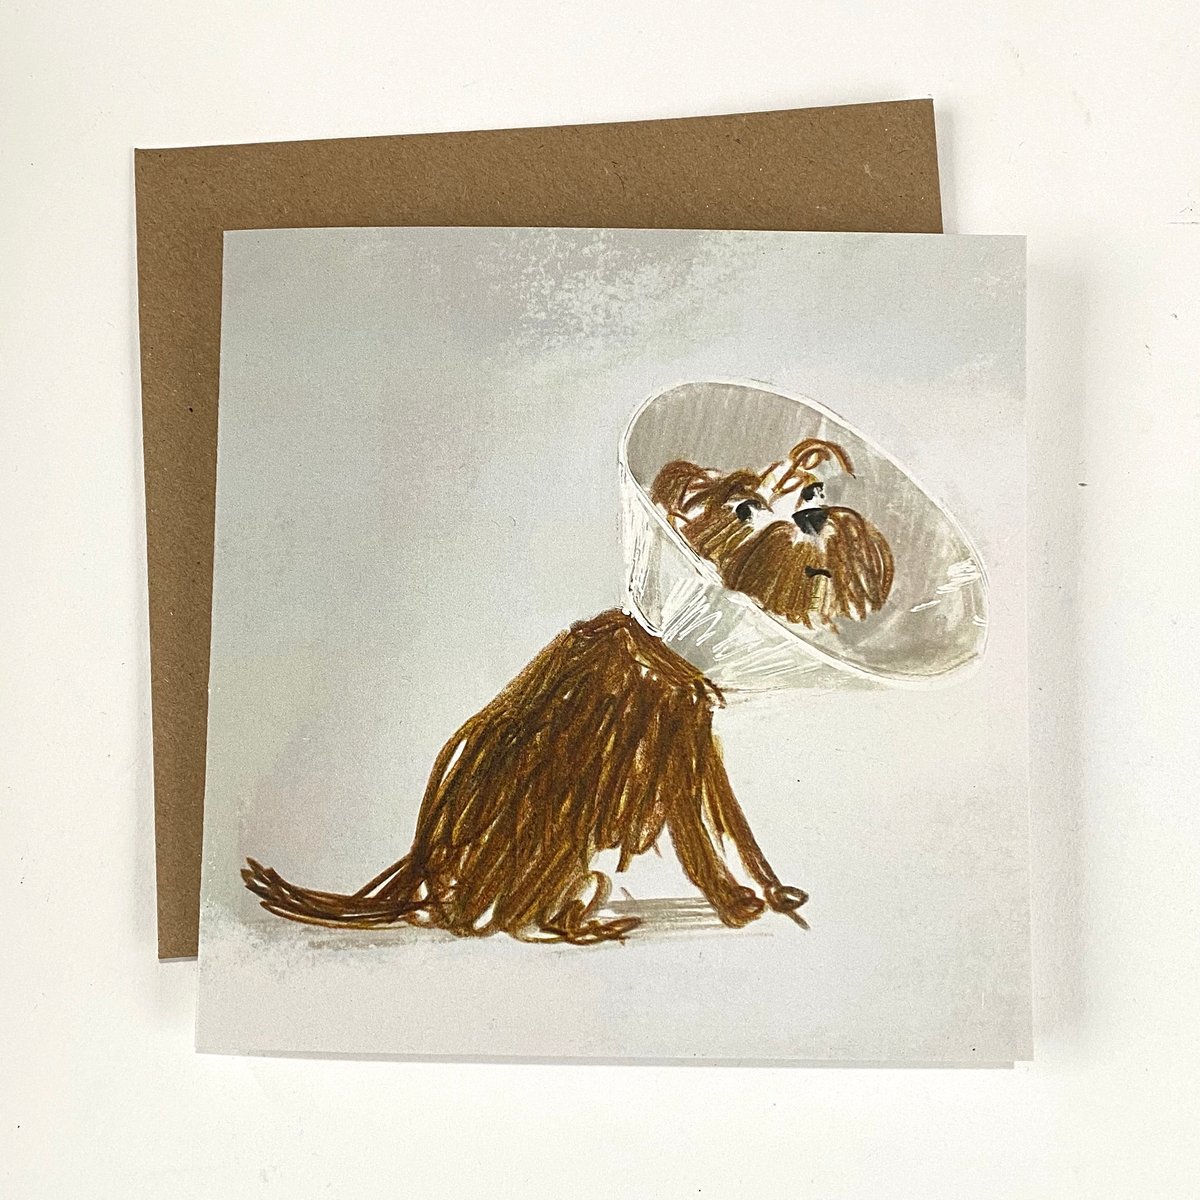 Image of ‘Cone of Shame’ luxury greetings card